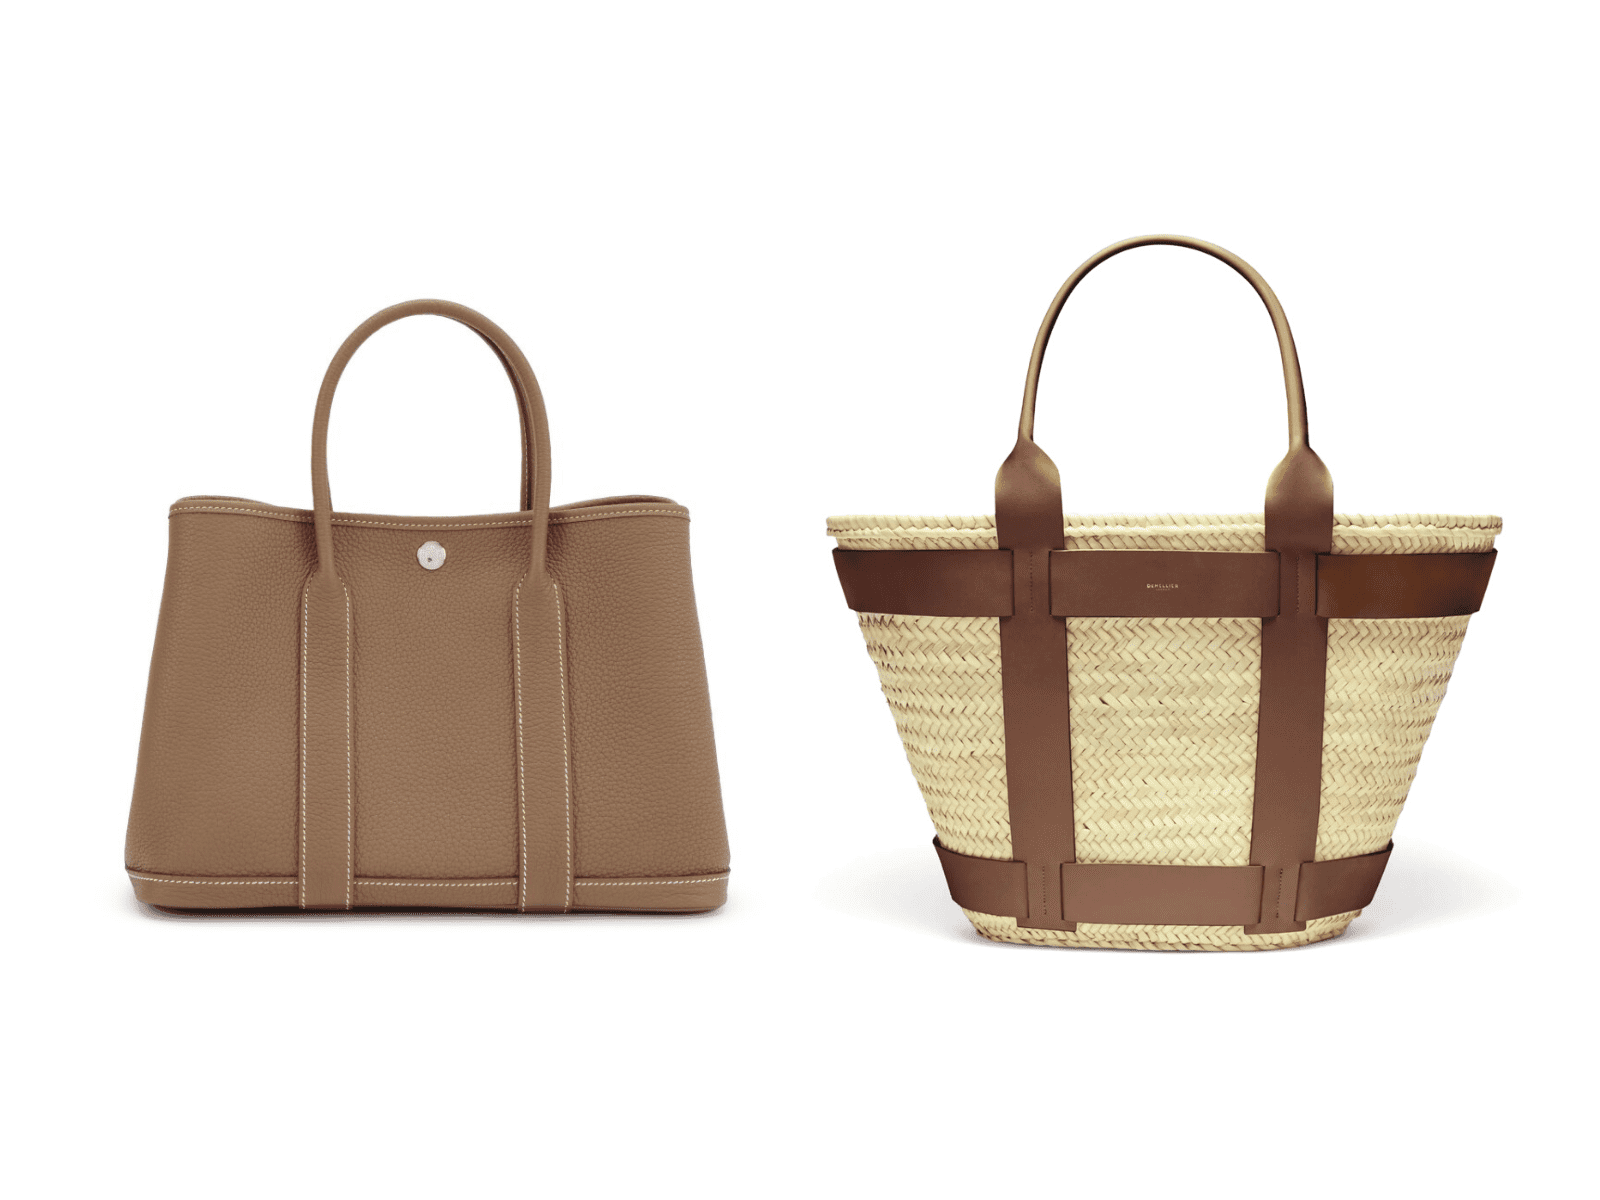 The perfect beach bag  Bags, Luxury bags, Purses